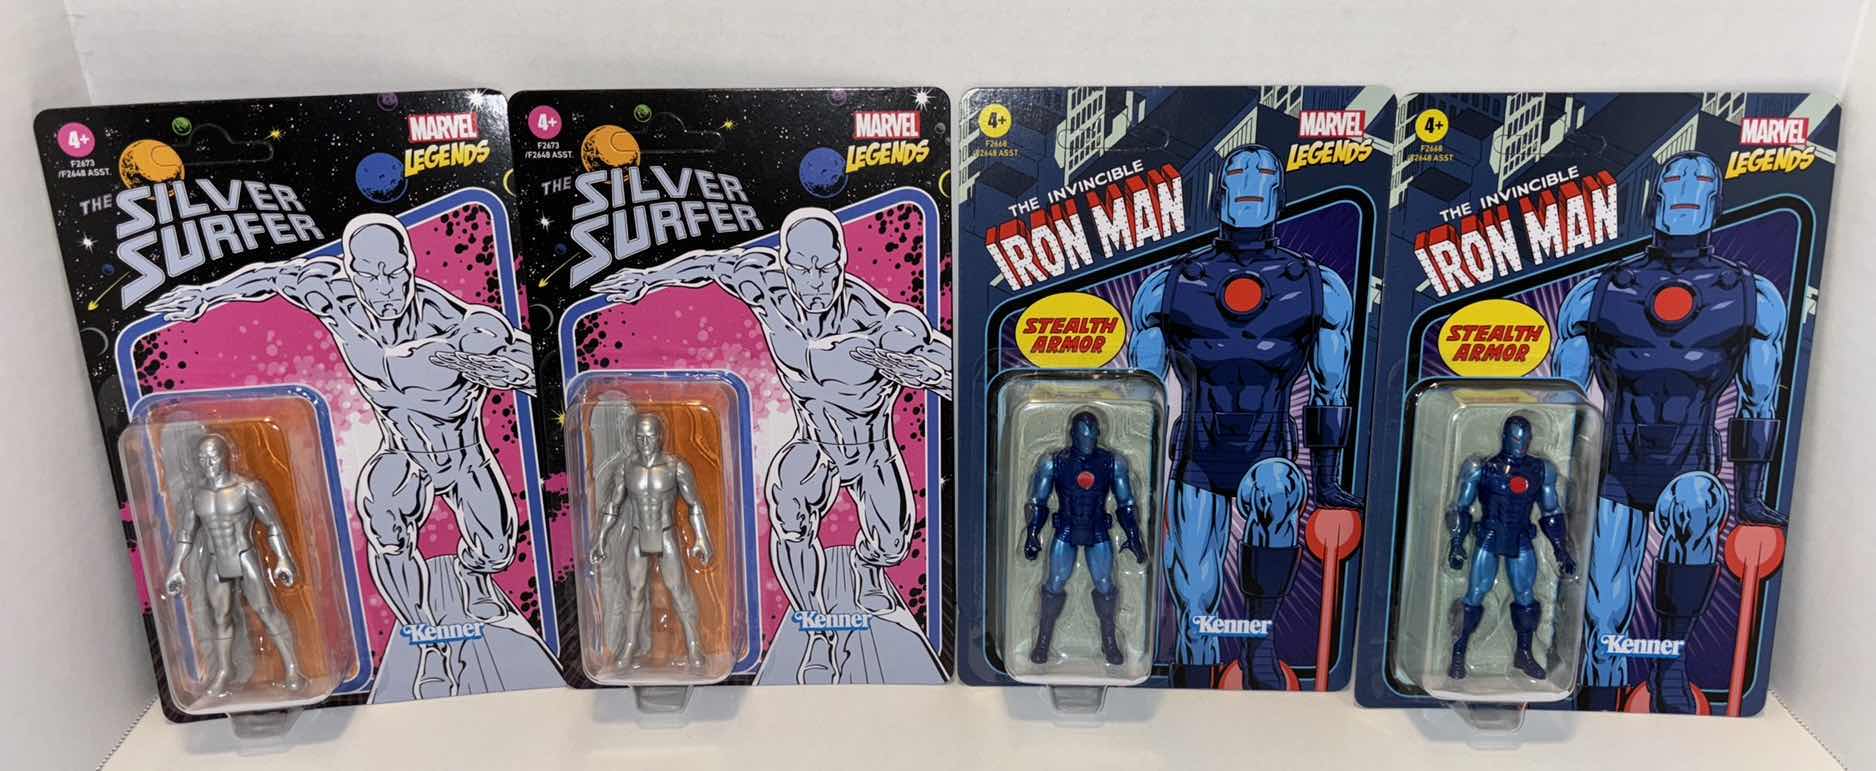 Photo 1 of NEW HASBRO KENNER MARVEL LEGENDS RETRO COLLECTION 3.75” ACTION FIGURES 4-PACK, THE INVINCIBLE IRON MAN “STEALTH ARMOR” & “THE SILVER SURFER”